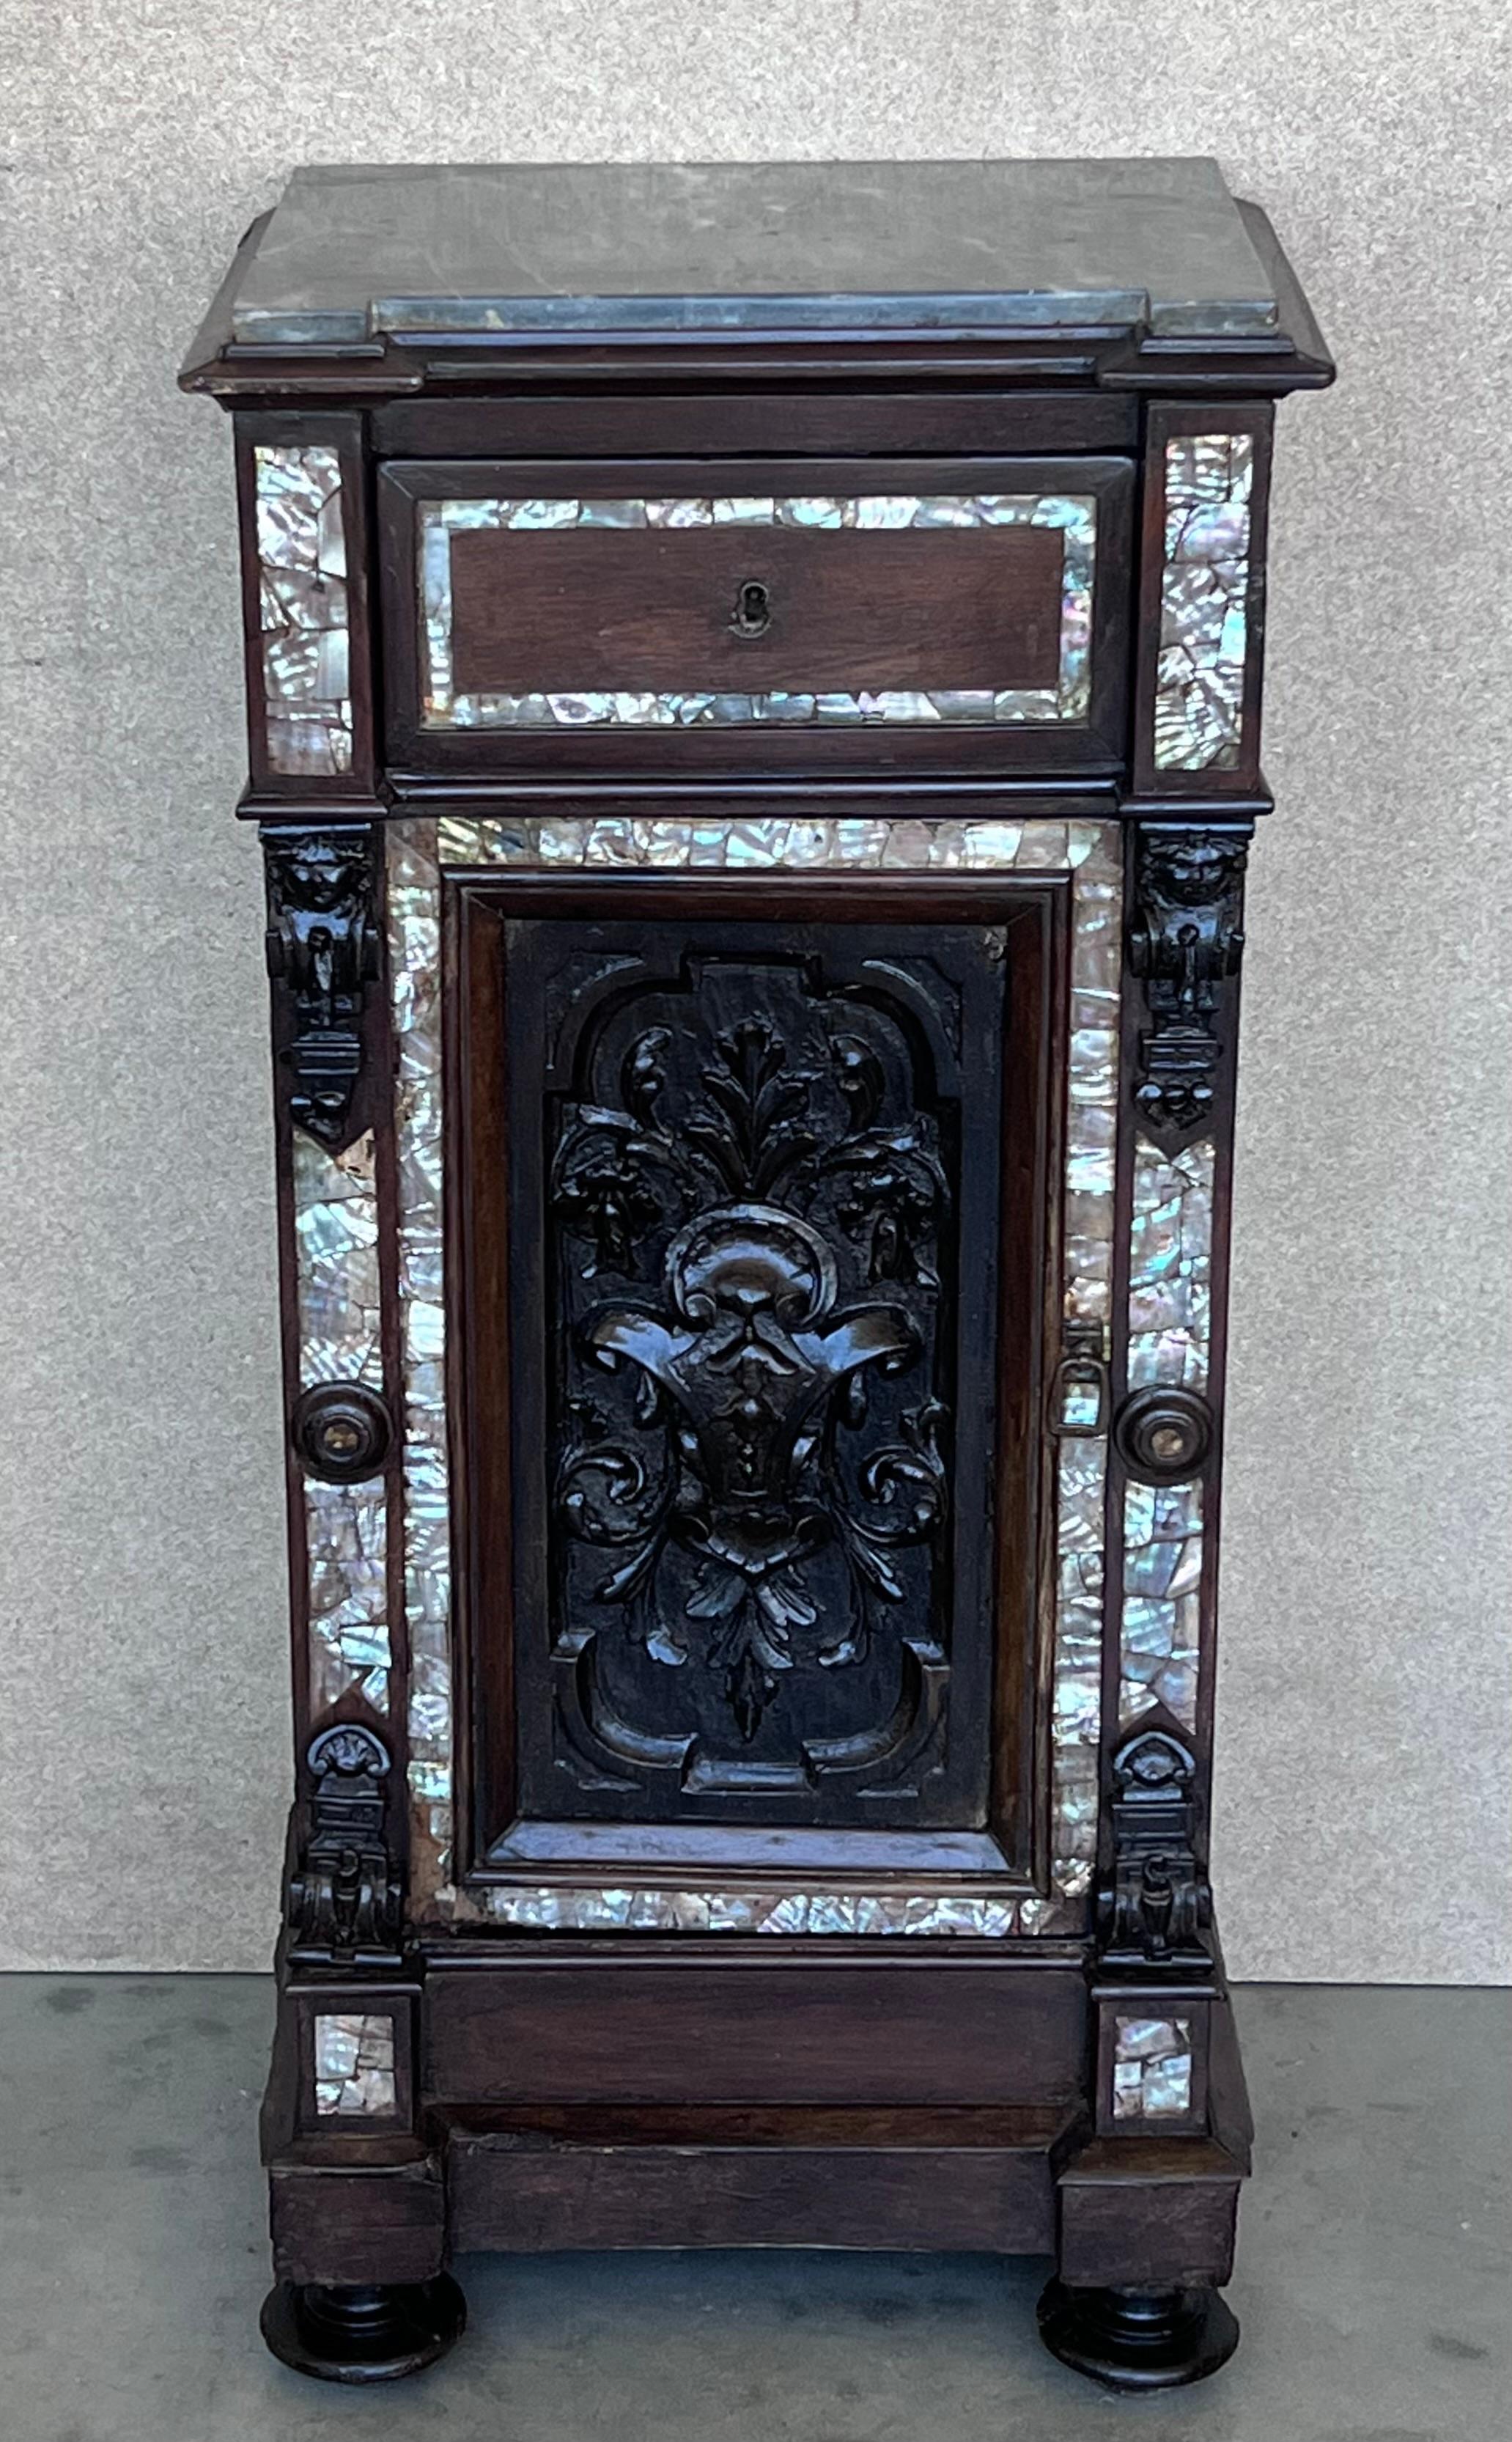 These elegant, antique bedside tables were created in Spain, circa 1800. Both matching cabinets are made of solid walnut; they have a recessed center carved door flanked by a pair of inlay columns supports decorated with carved reliefs both at the